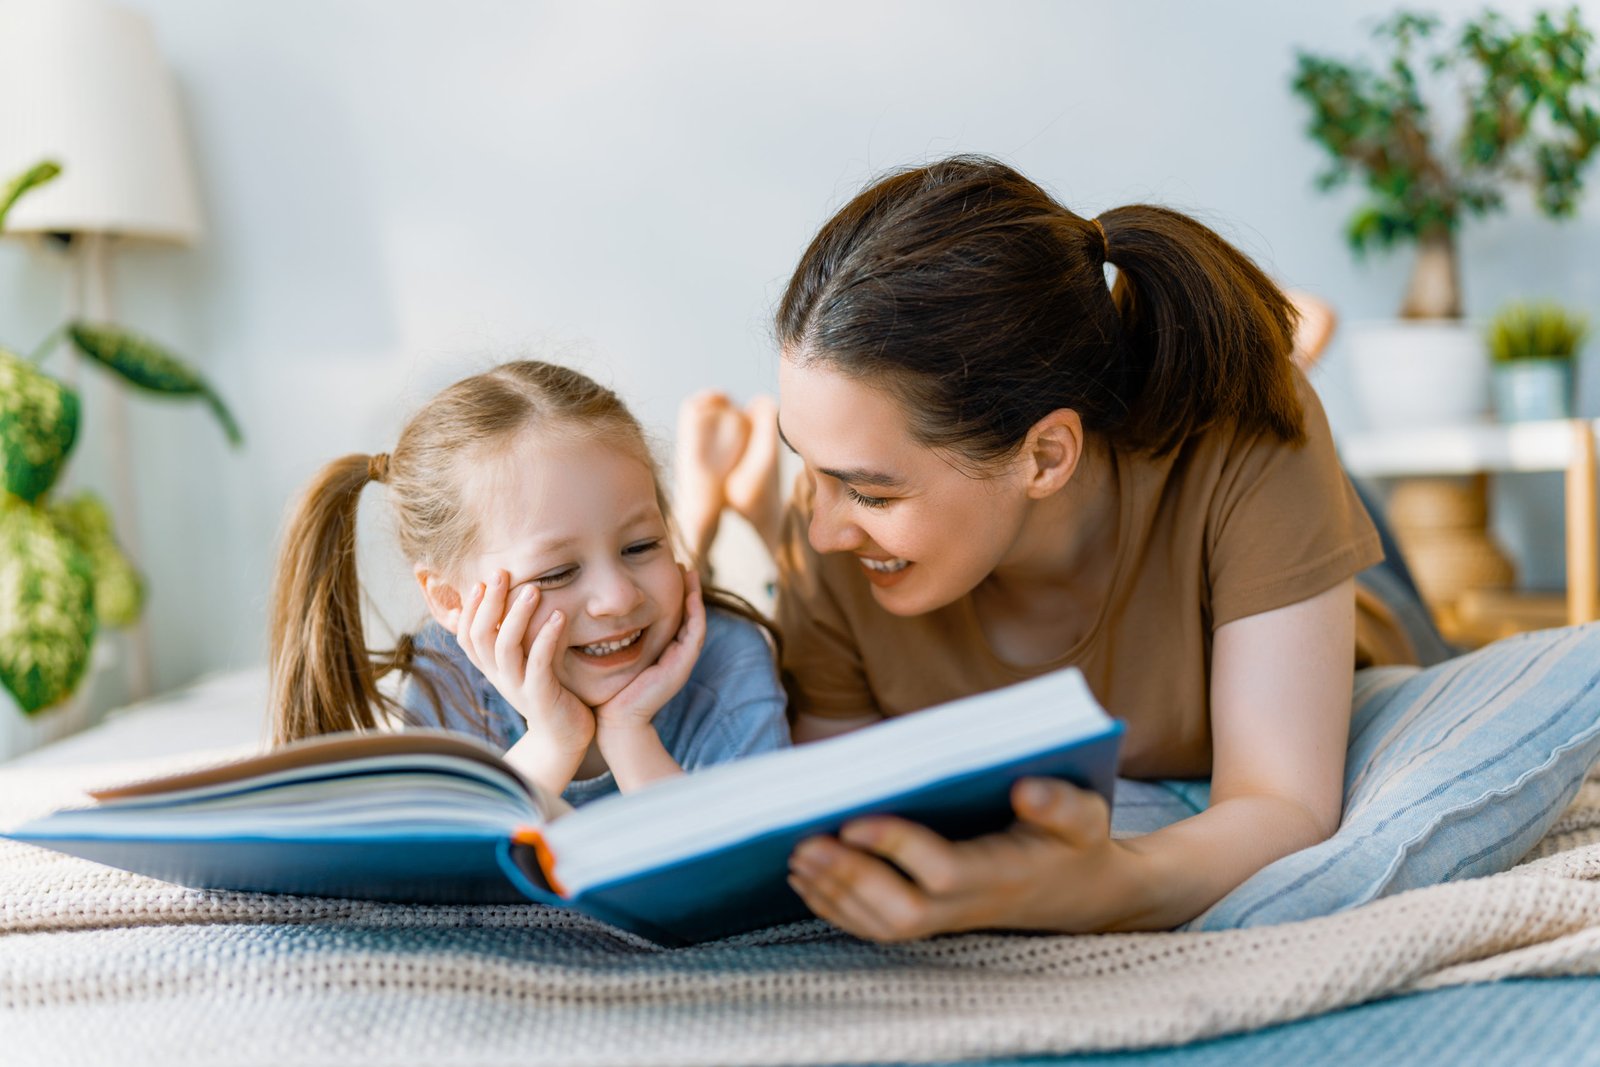 How parents can get young children excited about books